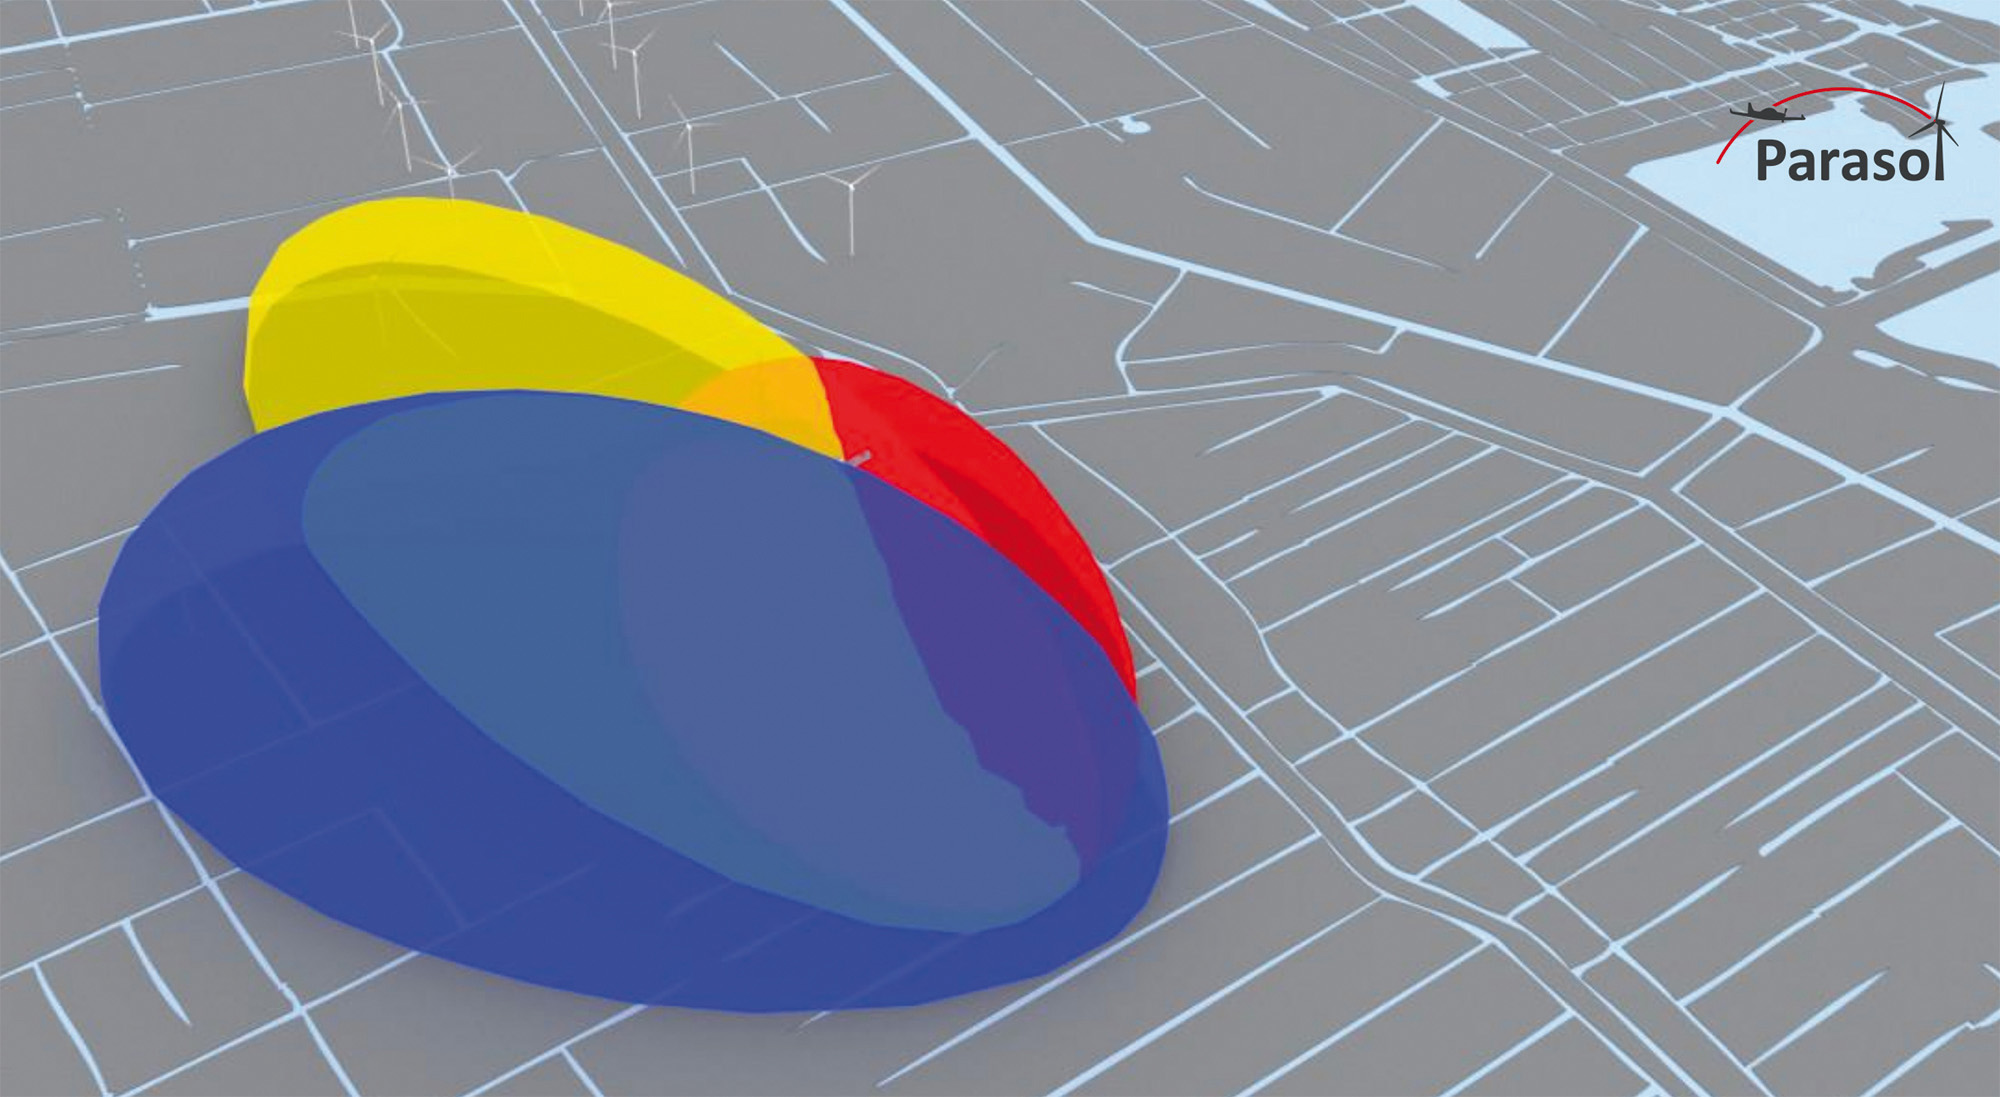 Intersection of three ellipsoids for 3D locating.